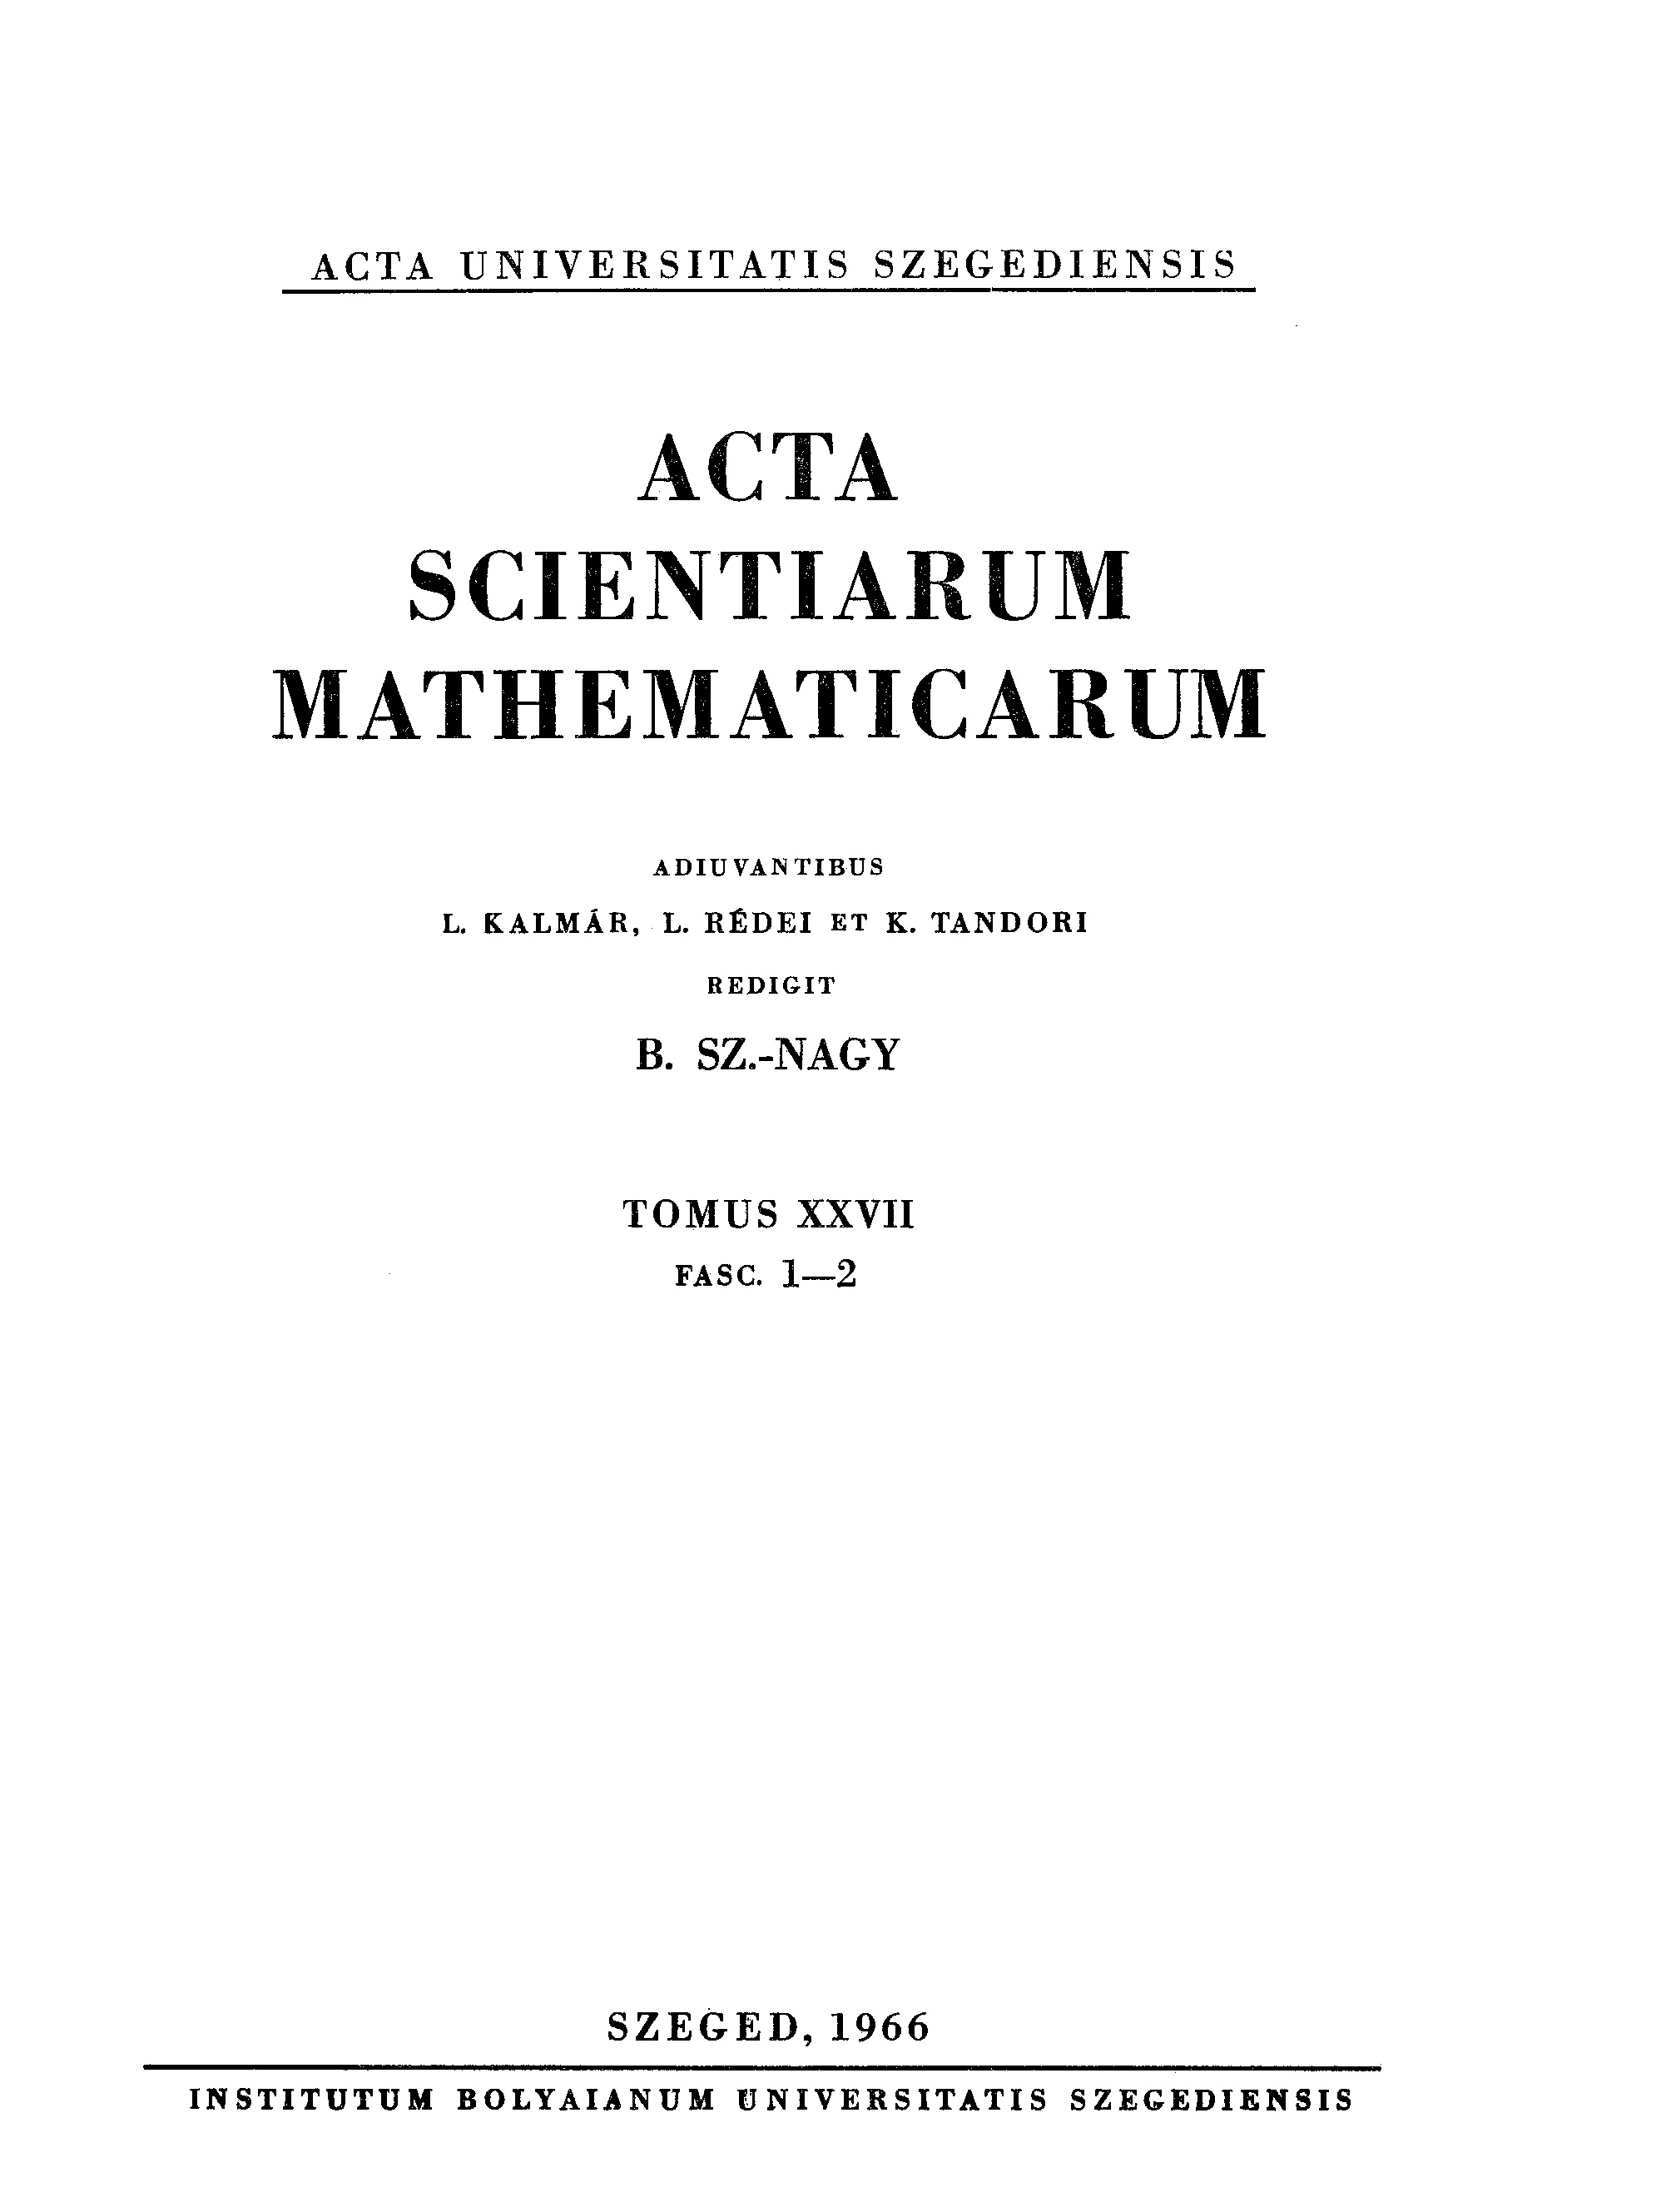 Acta Sci. Math. cover from 1966